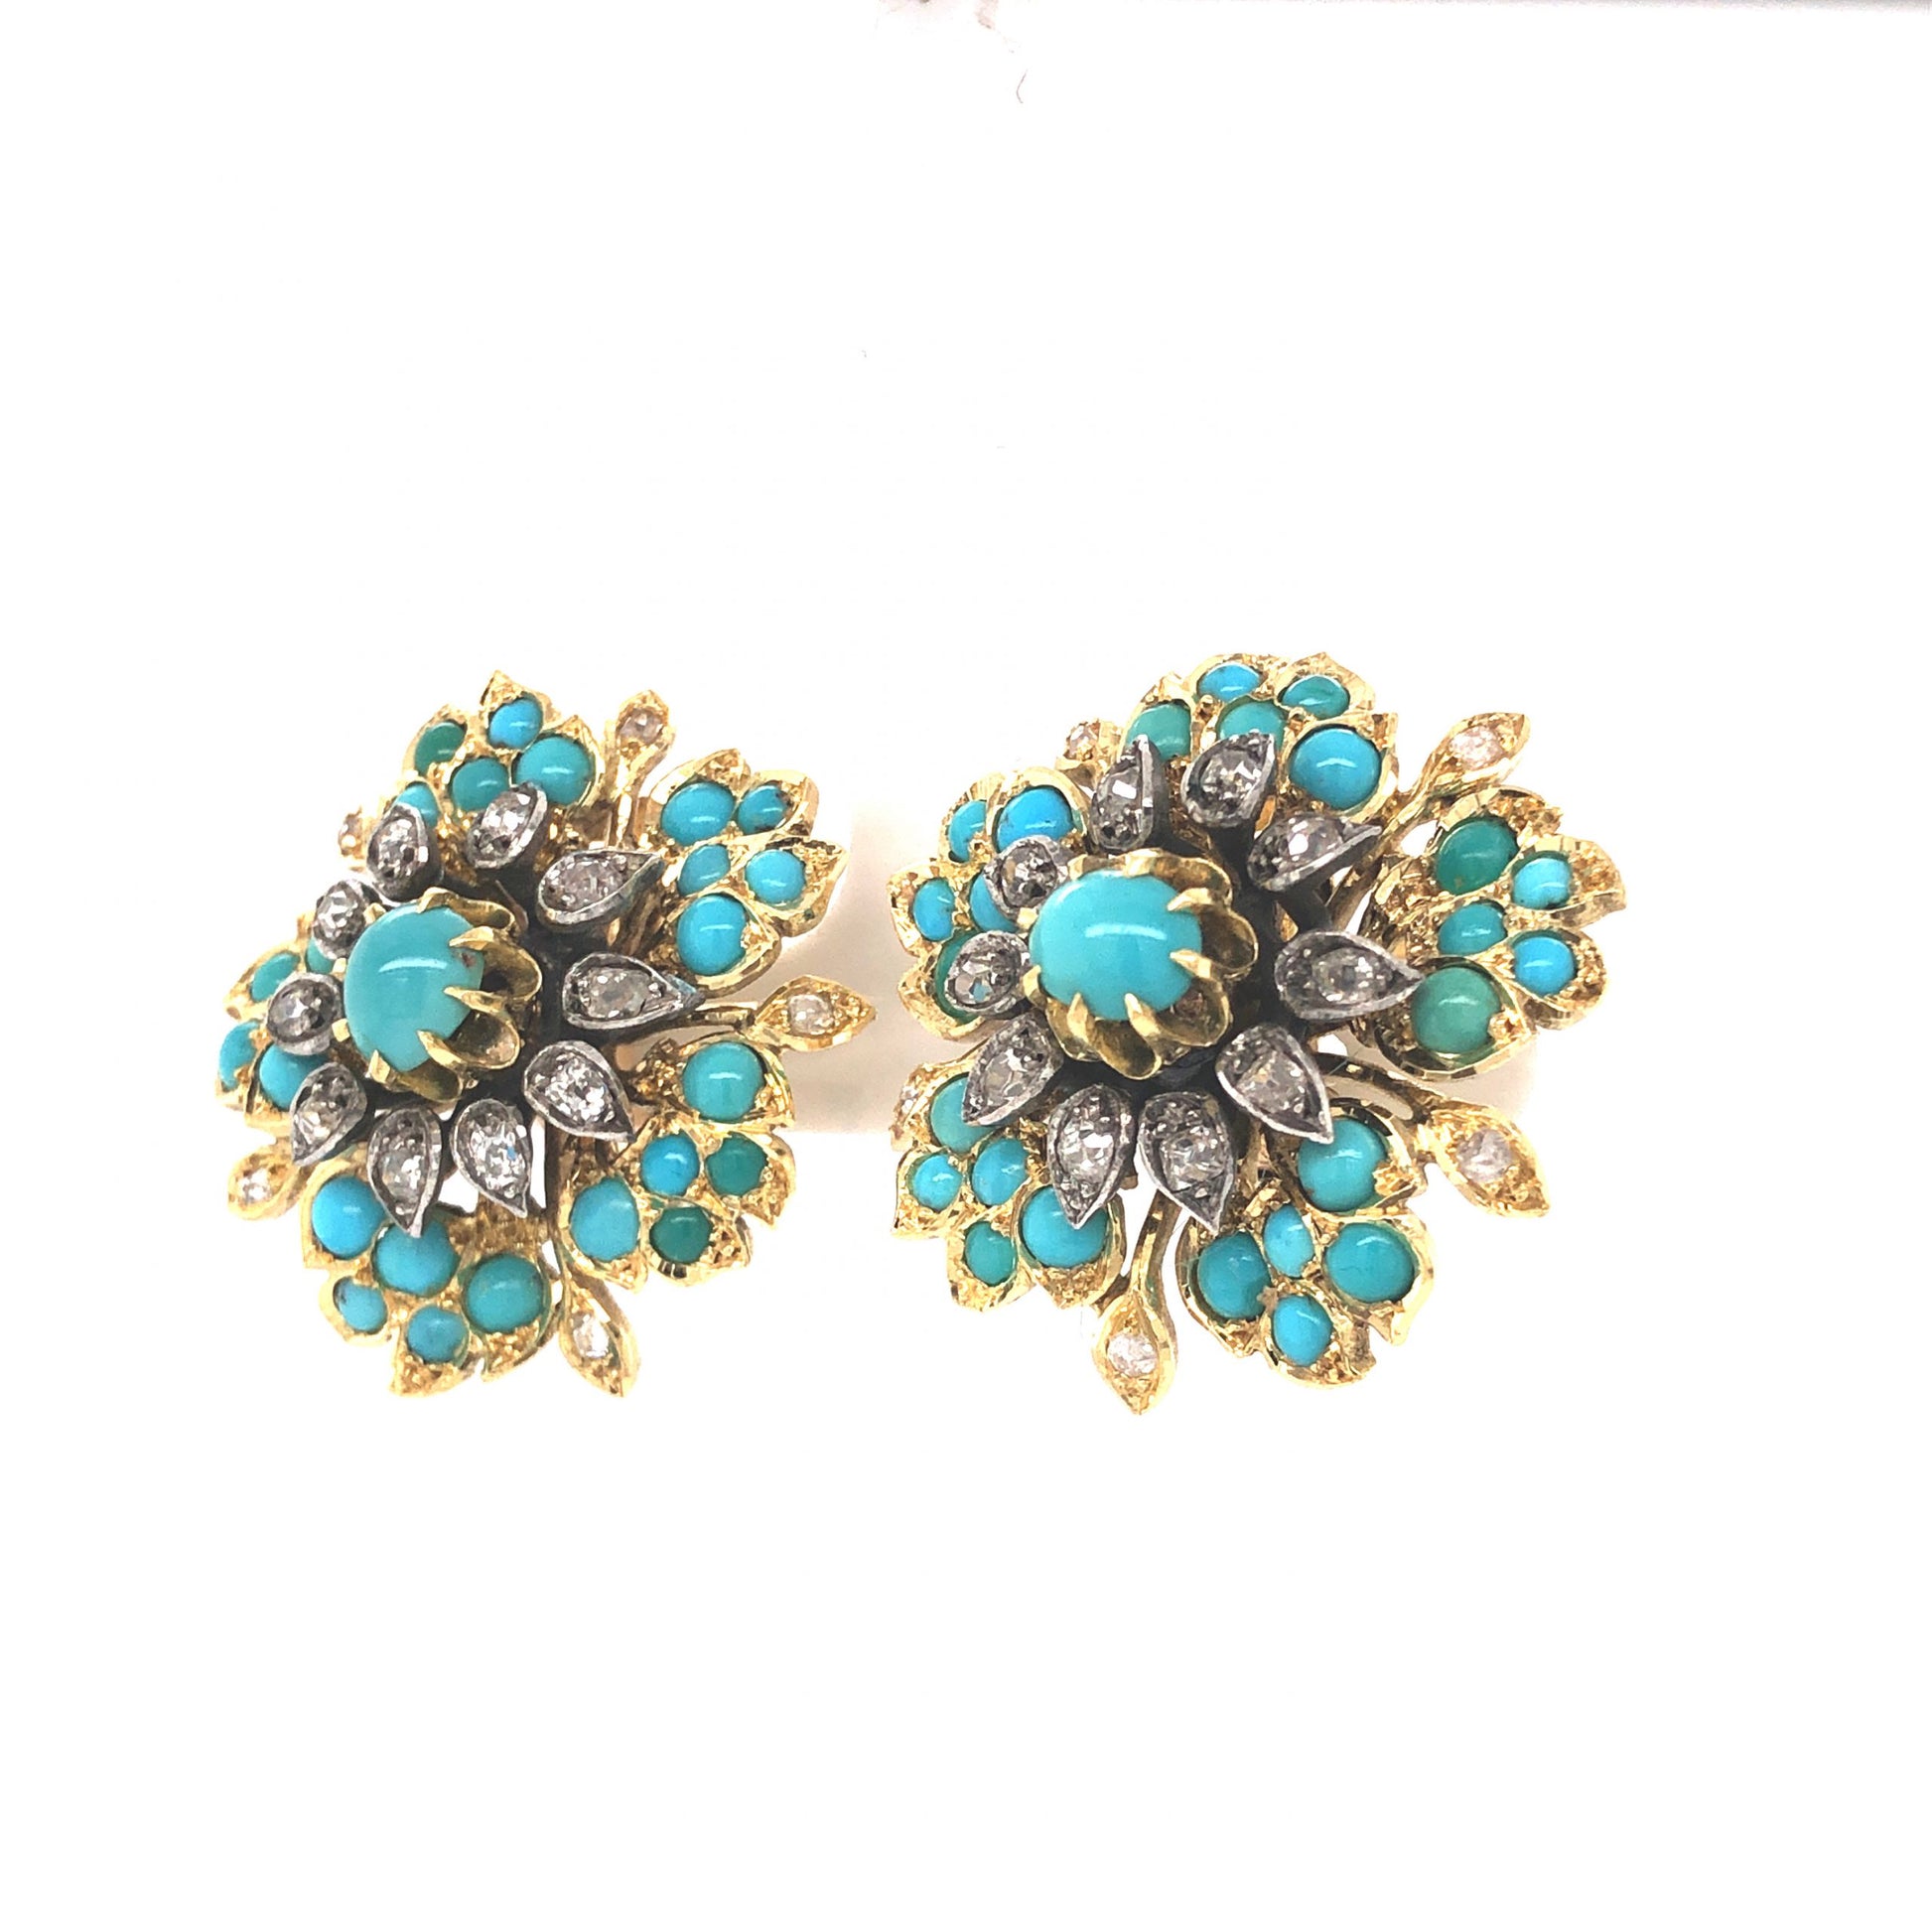 Victorian Diamond & Turquoise Earrings in 18k Yellow Gold & Silver